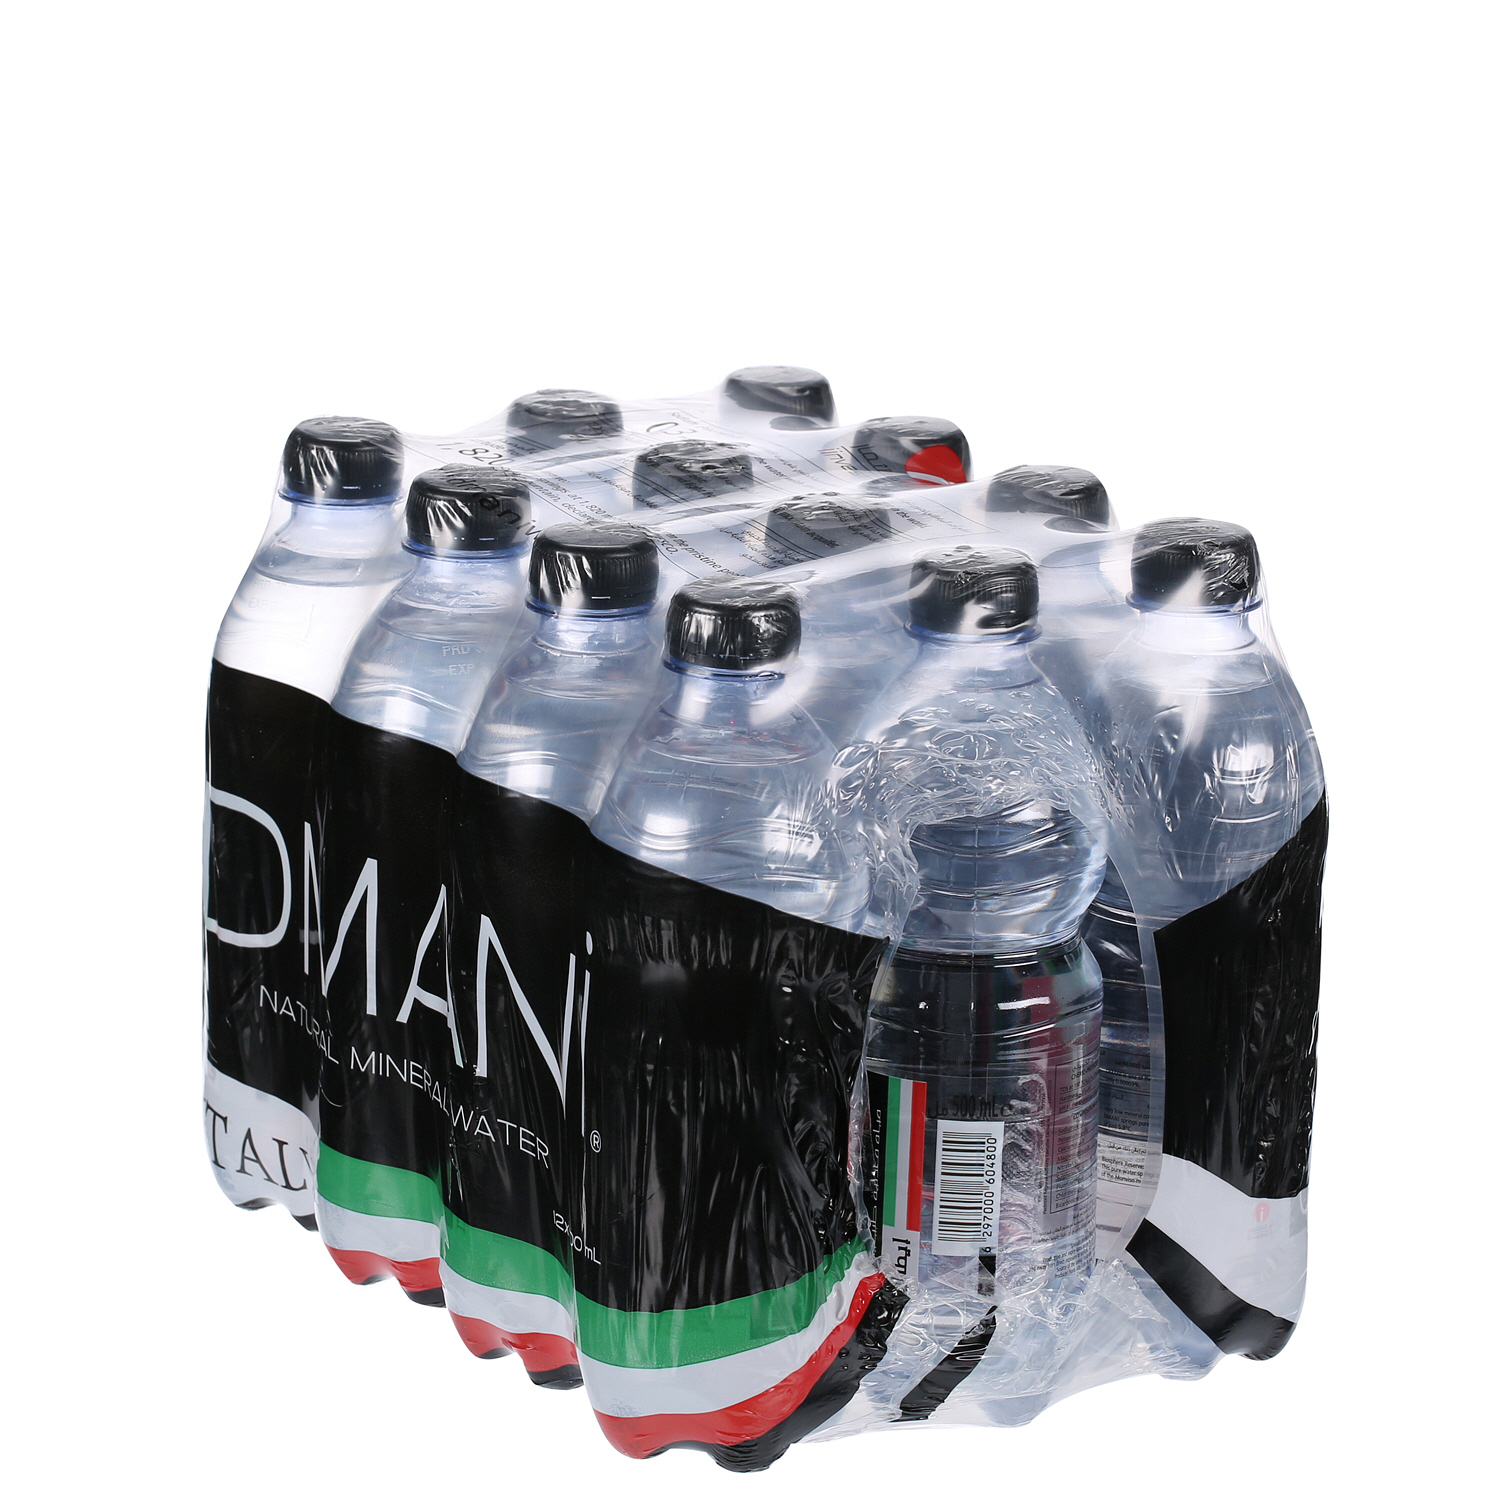 Dmani Natural Mineral Water 500 ml × 12 Pack